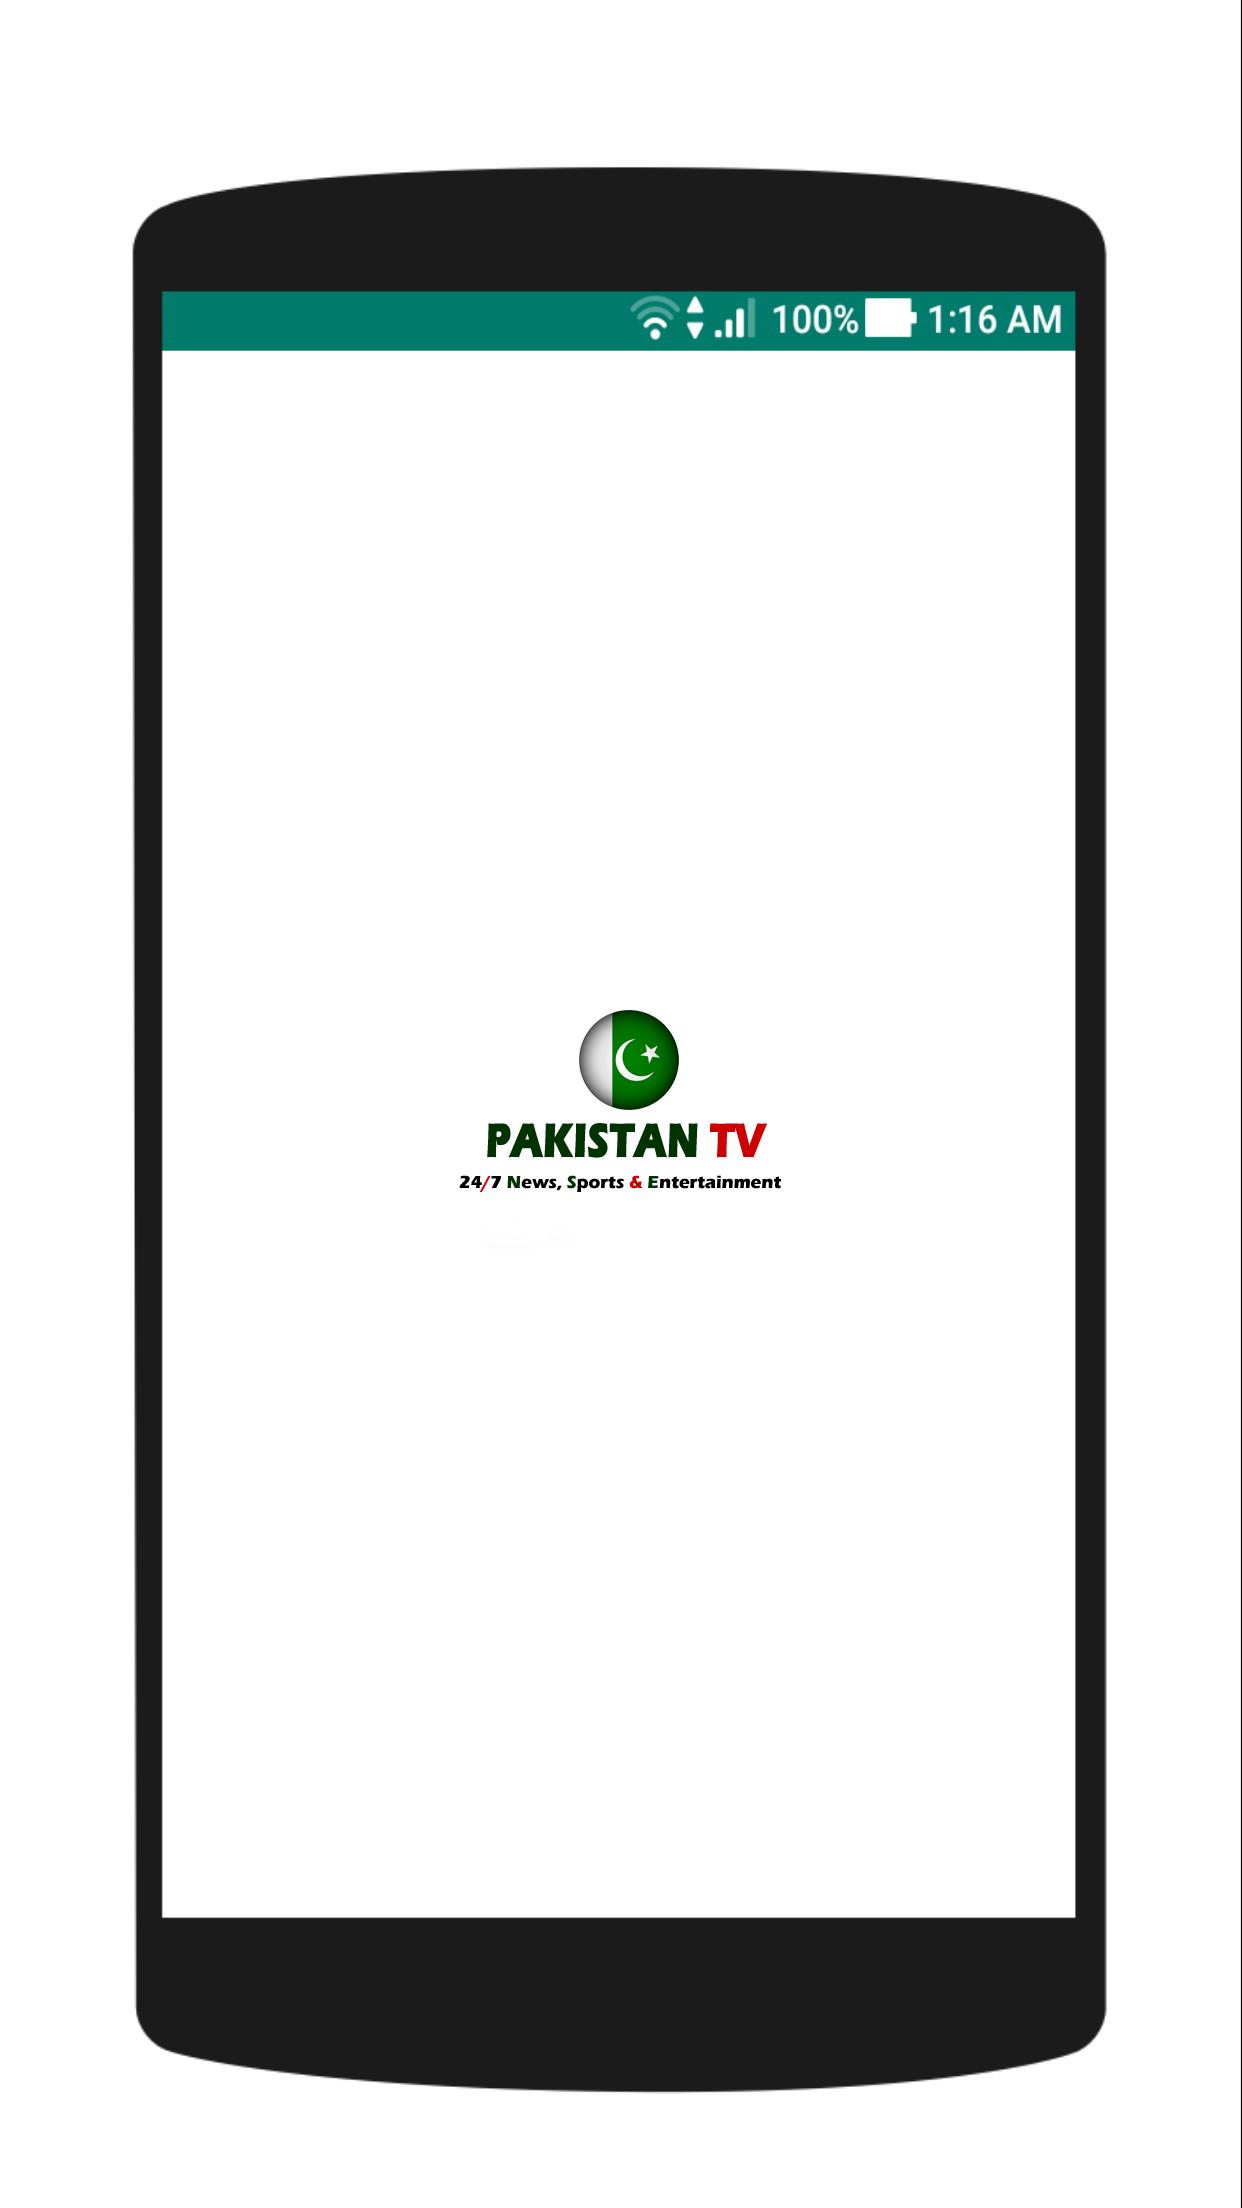 Pakistan Tv Watch 24 7 News Sports Live Free For Android Apk Download - roblox 2 is in the works channel 24 news